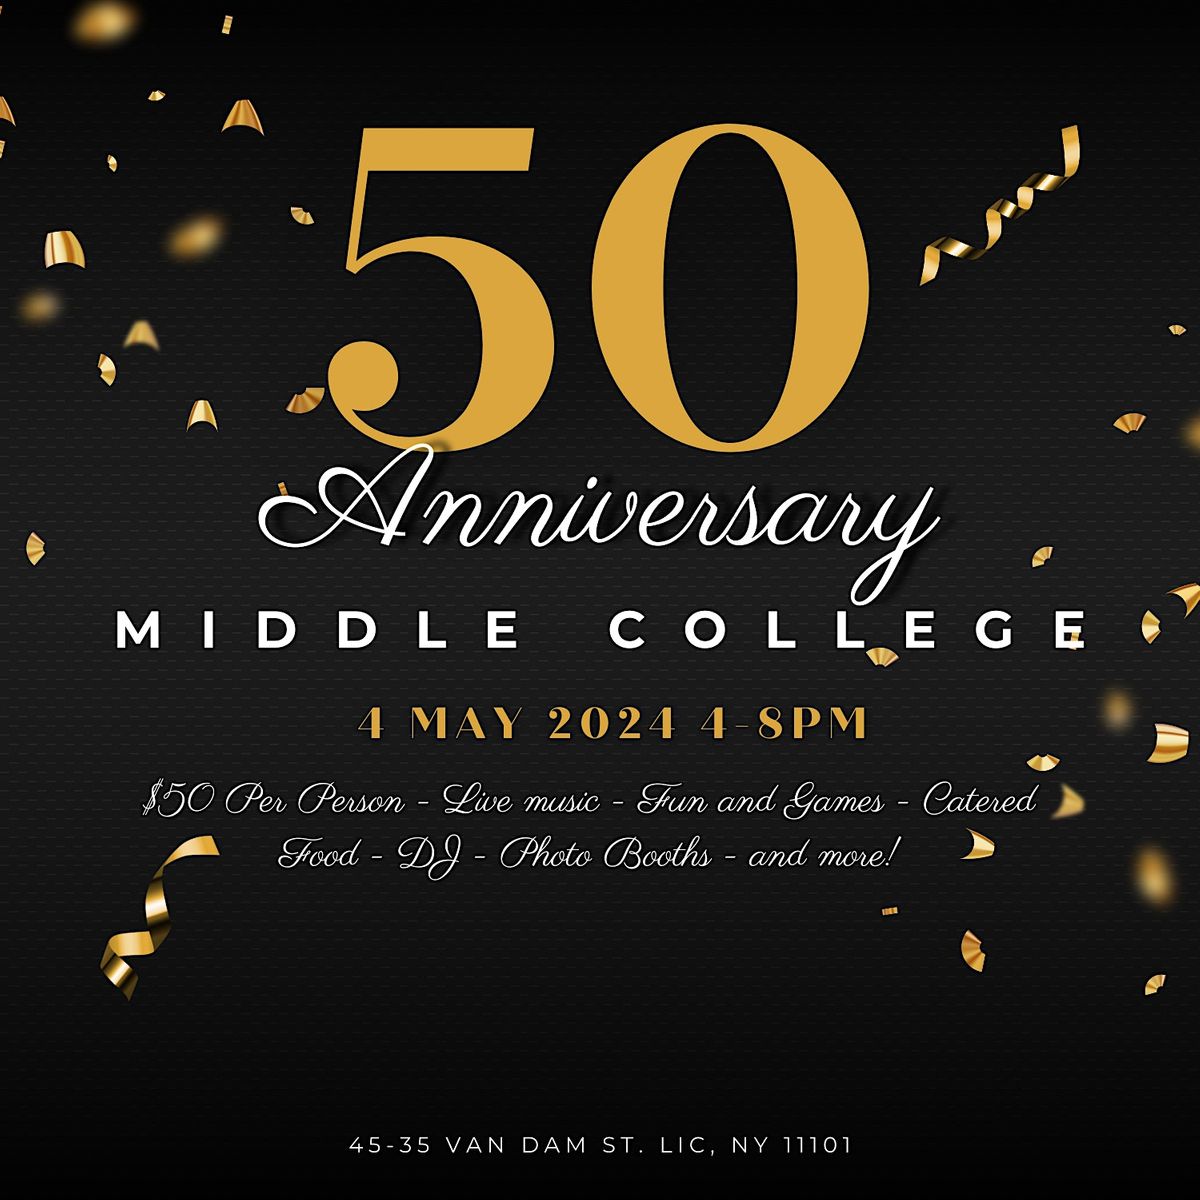 MCHS 50th Anniversary Celebration - Live Music, DJ, Games, Food, and More!